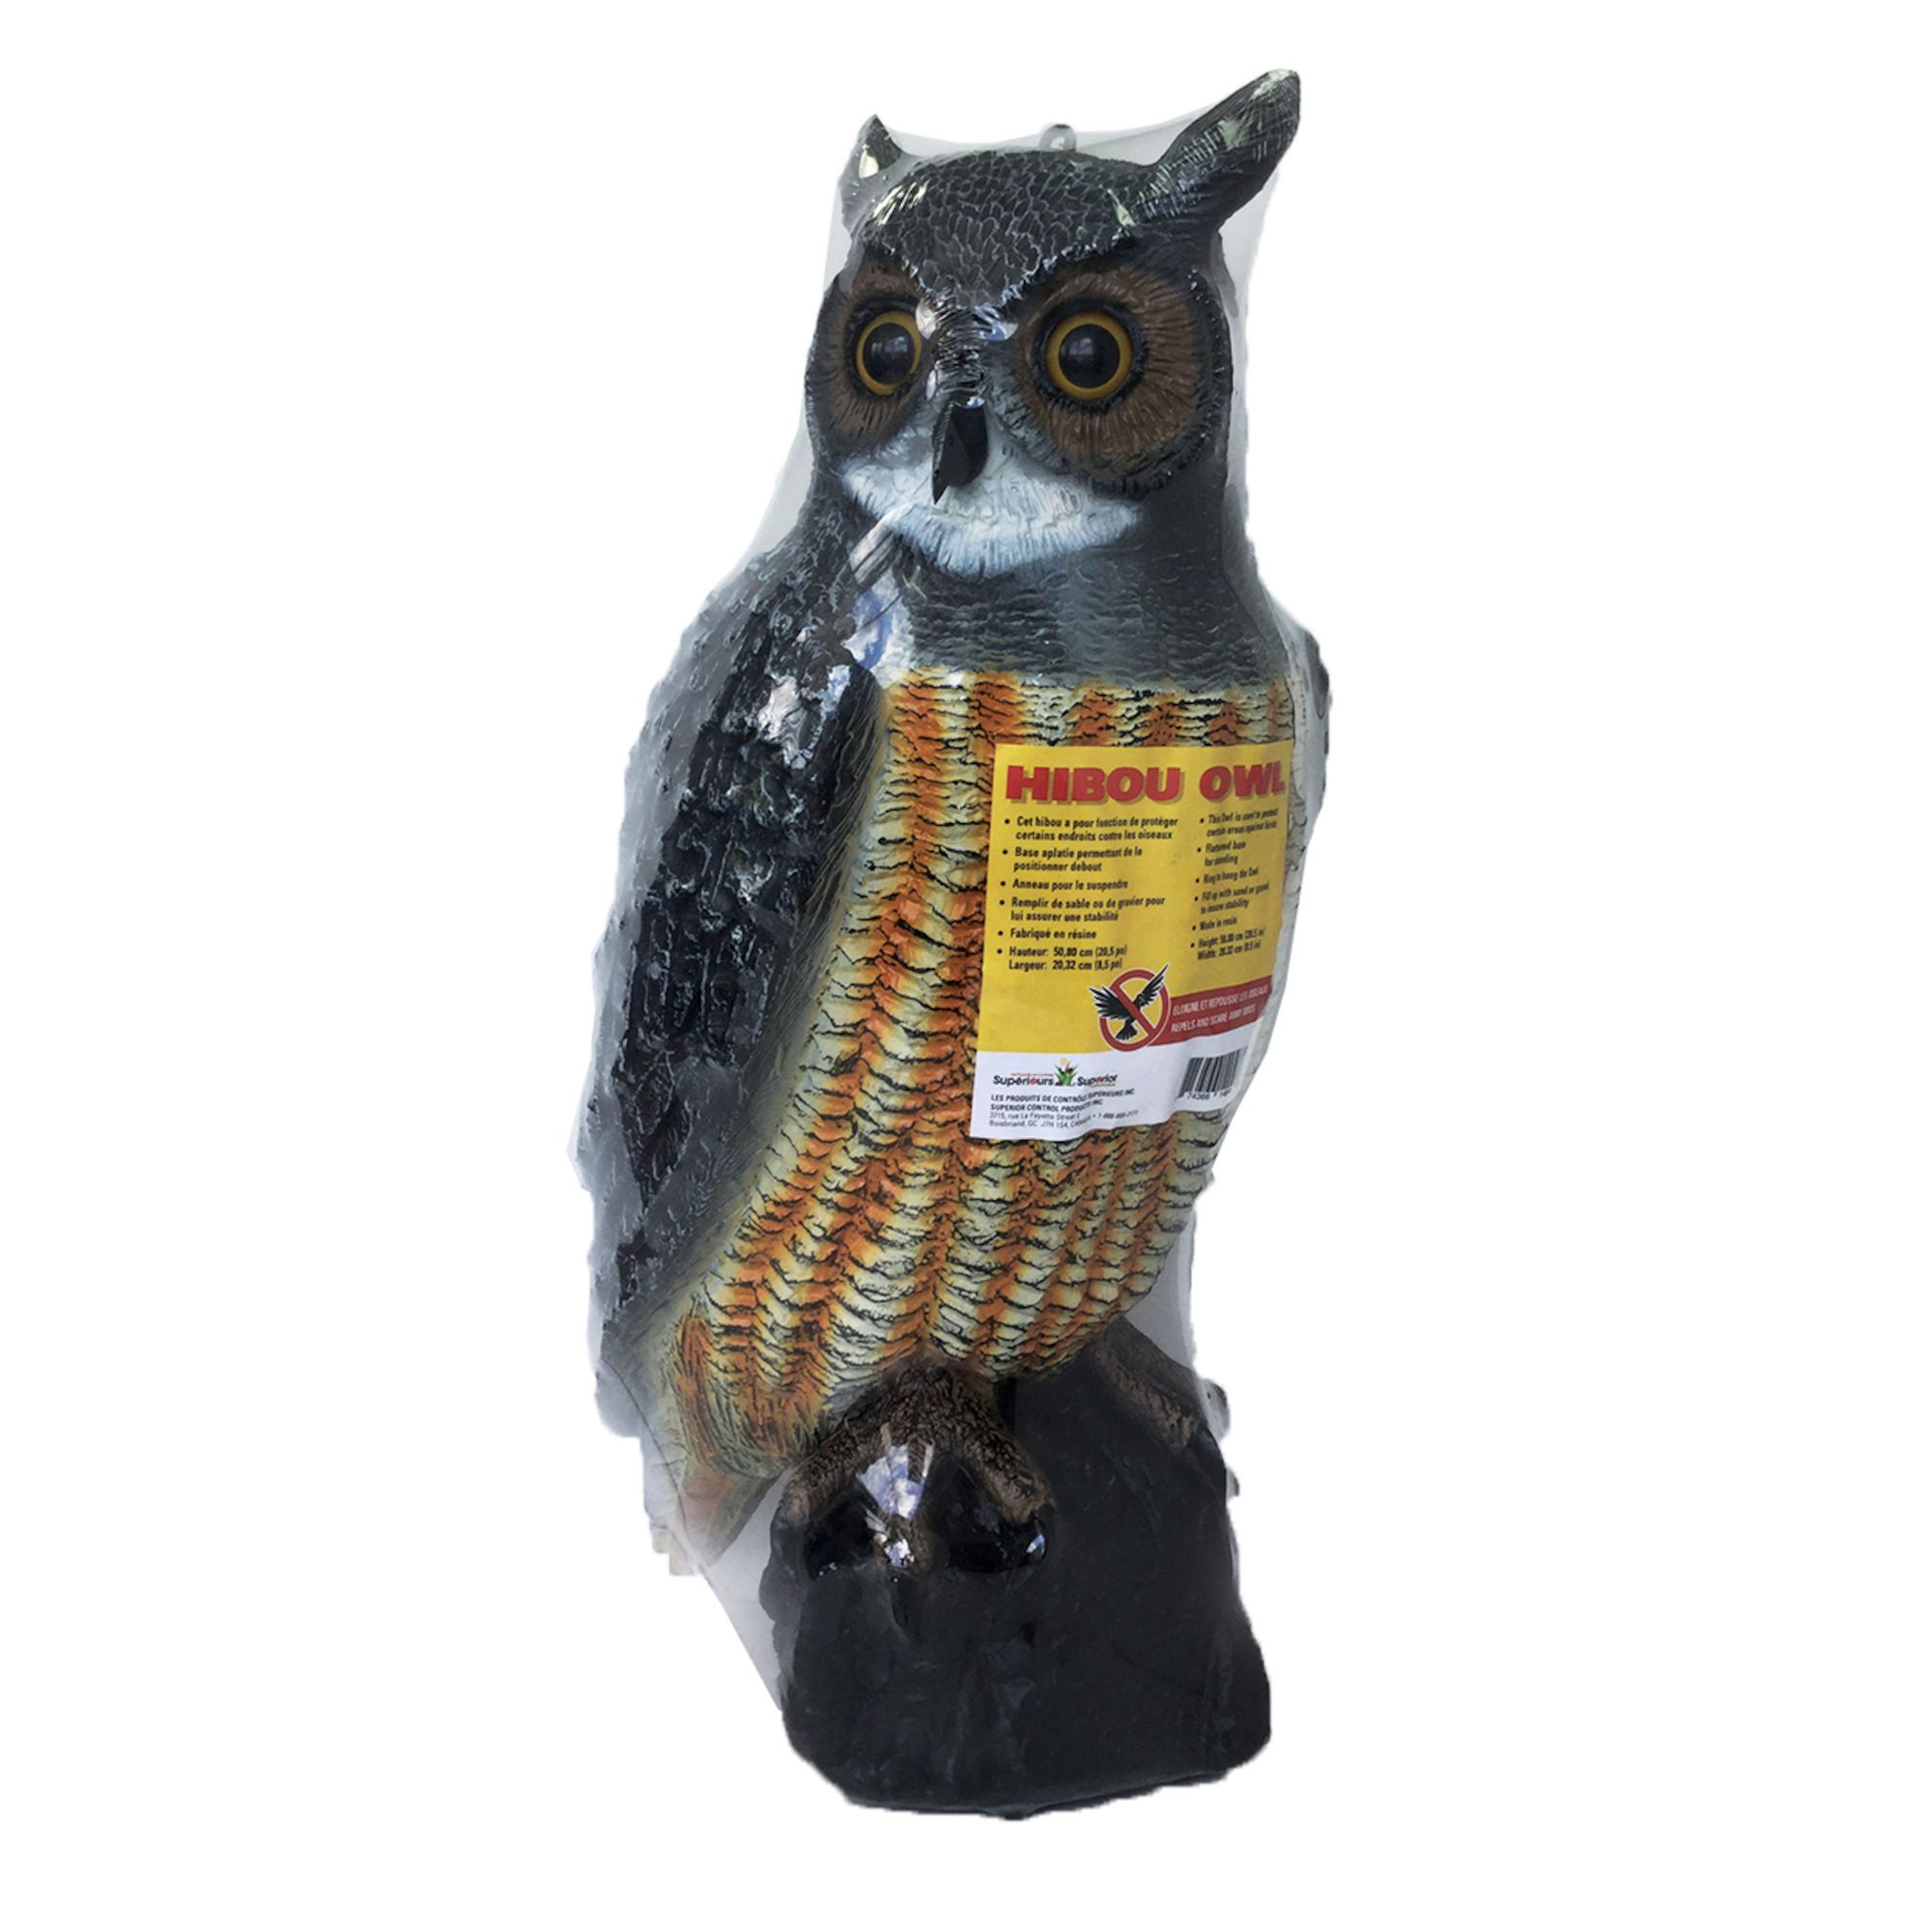 Repellent owl from Superior Control Products